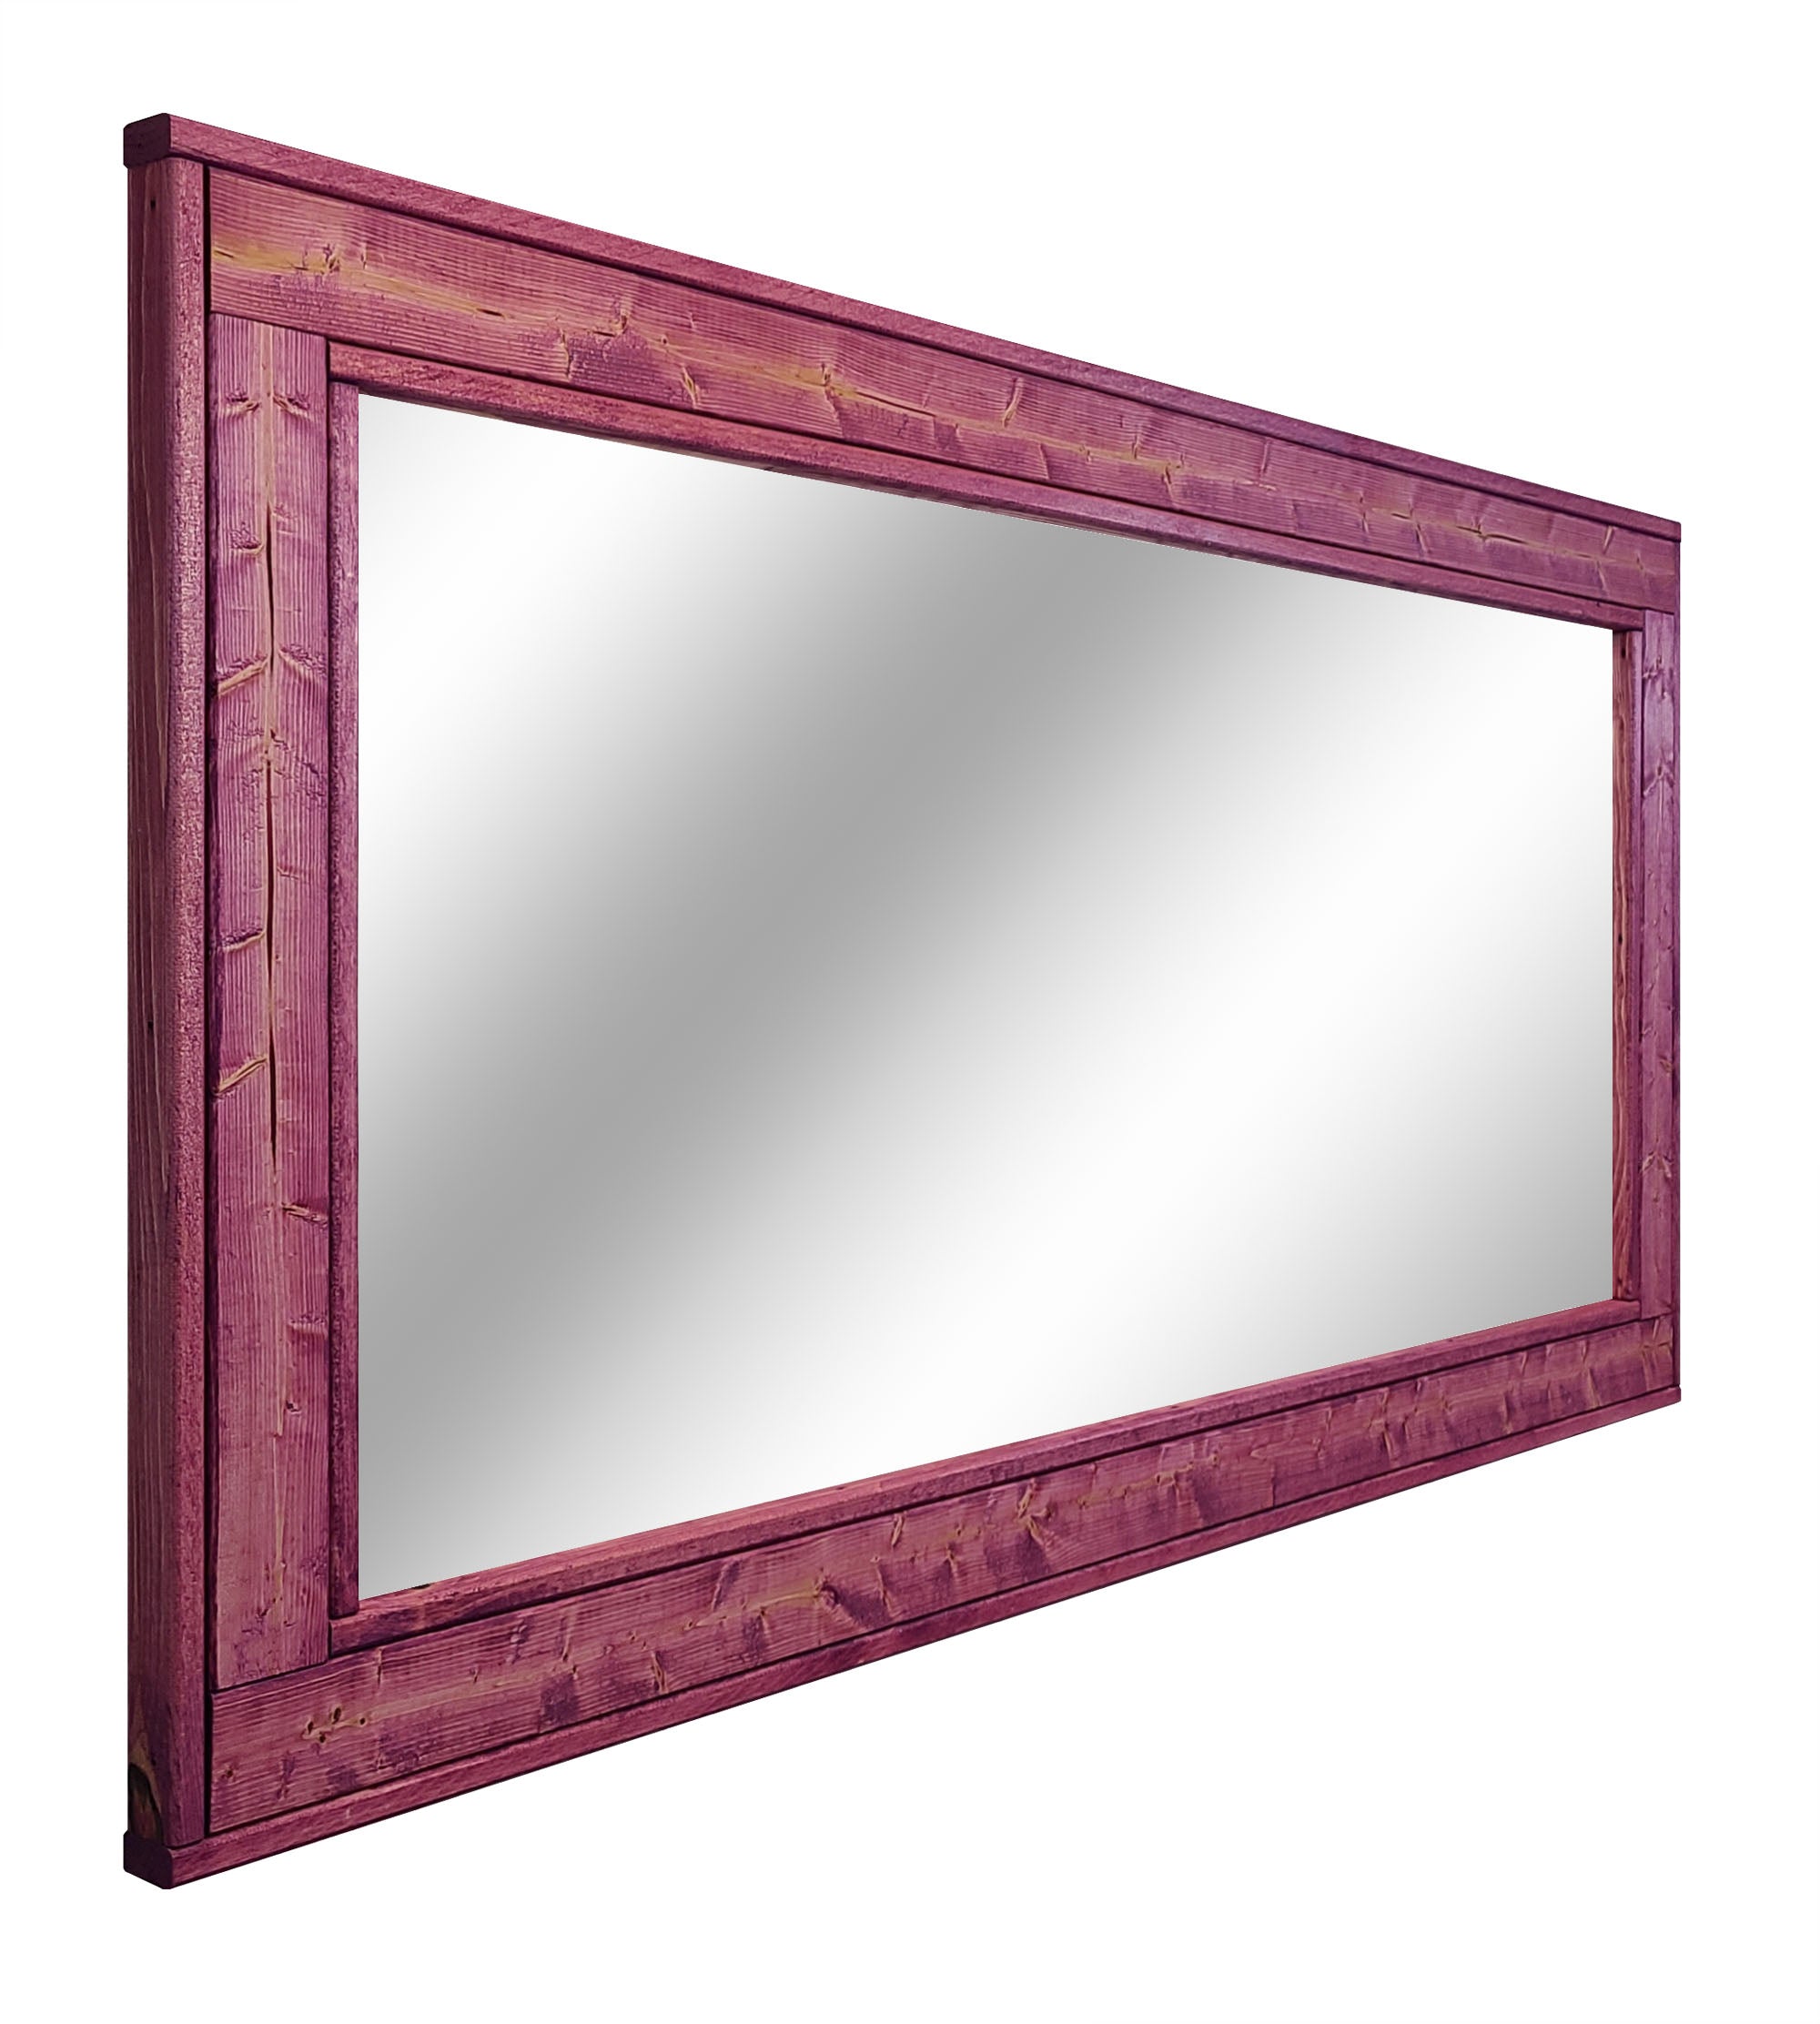 Herringbone Rustic Reclaimed Wood Wall Mirror, 5 Sizes & 13 Colors, Shown in Cherry Blossom